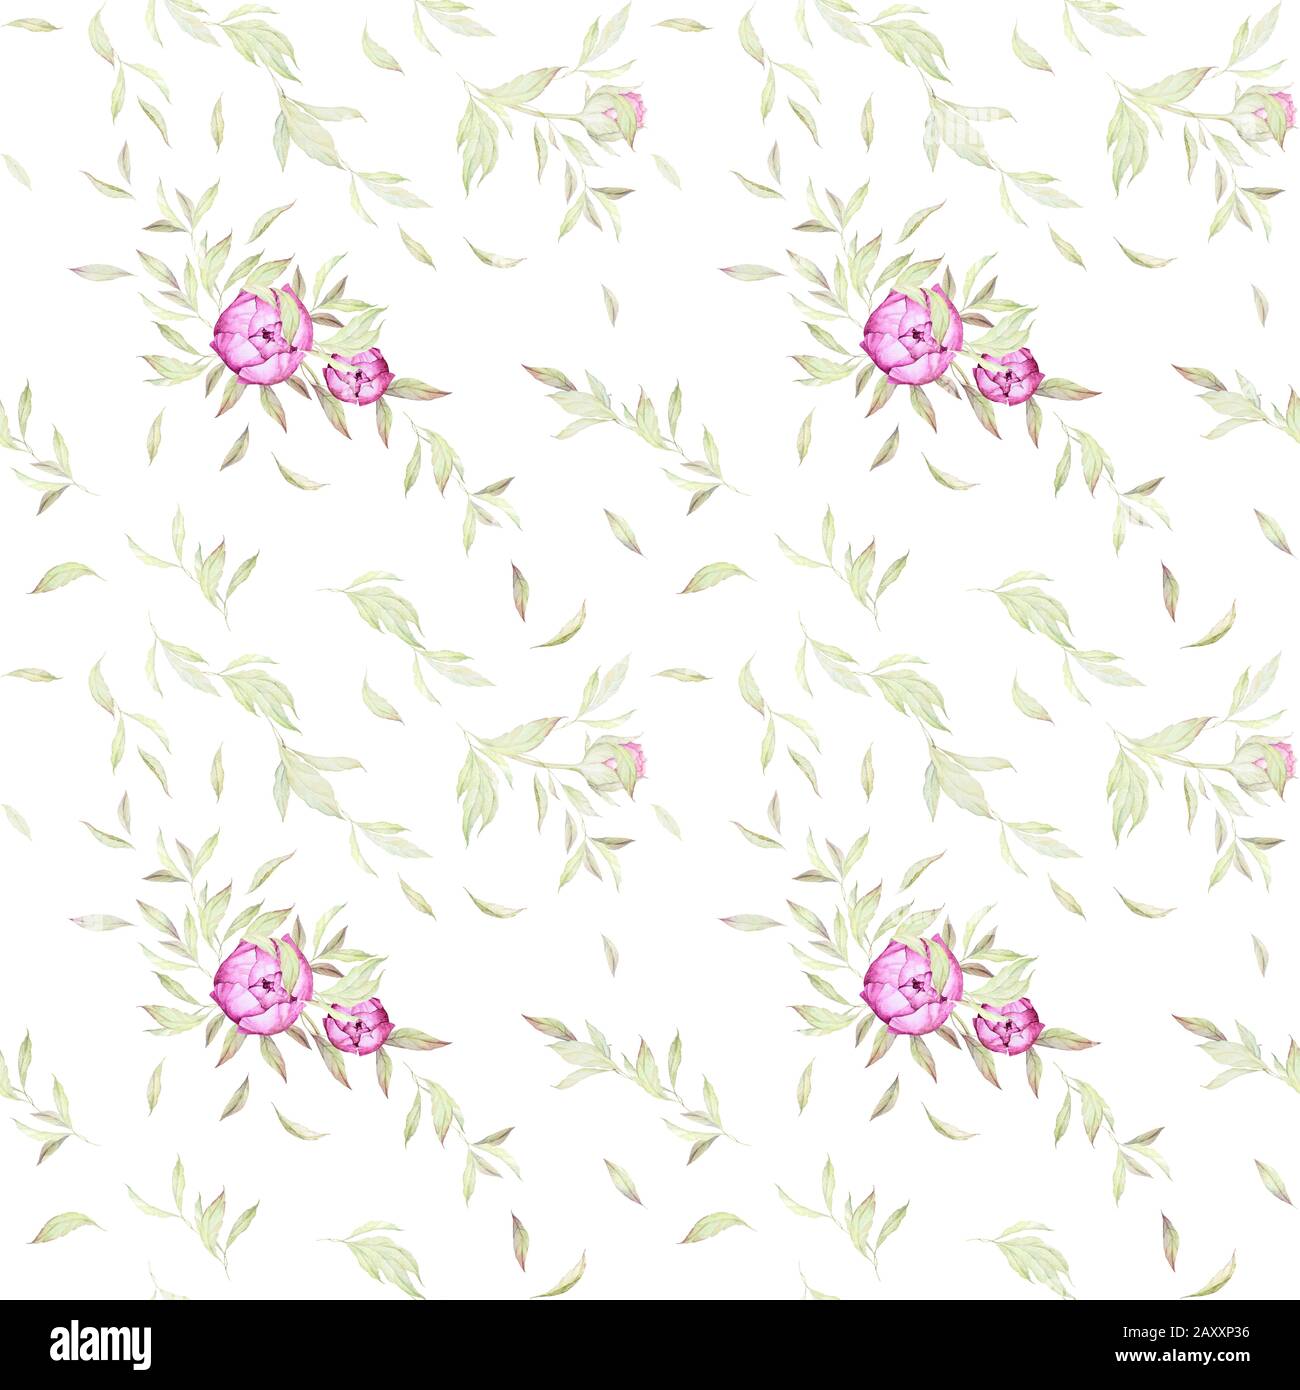 Seamless Floral Pattern. Watercolor Pink Flowers. Luxury Peonies. Vintage Decor. Luxury Pink Flowers, leaves. White background. Stock Photo